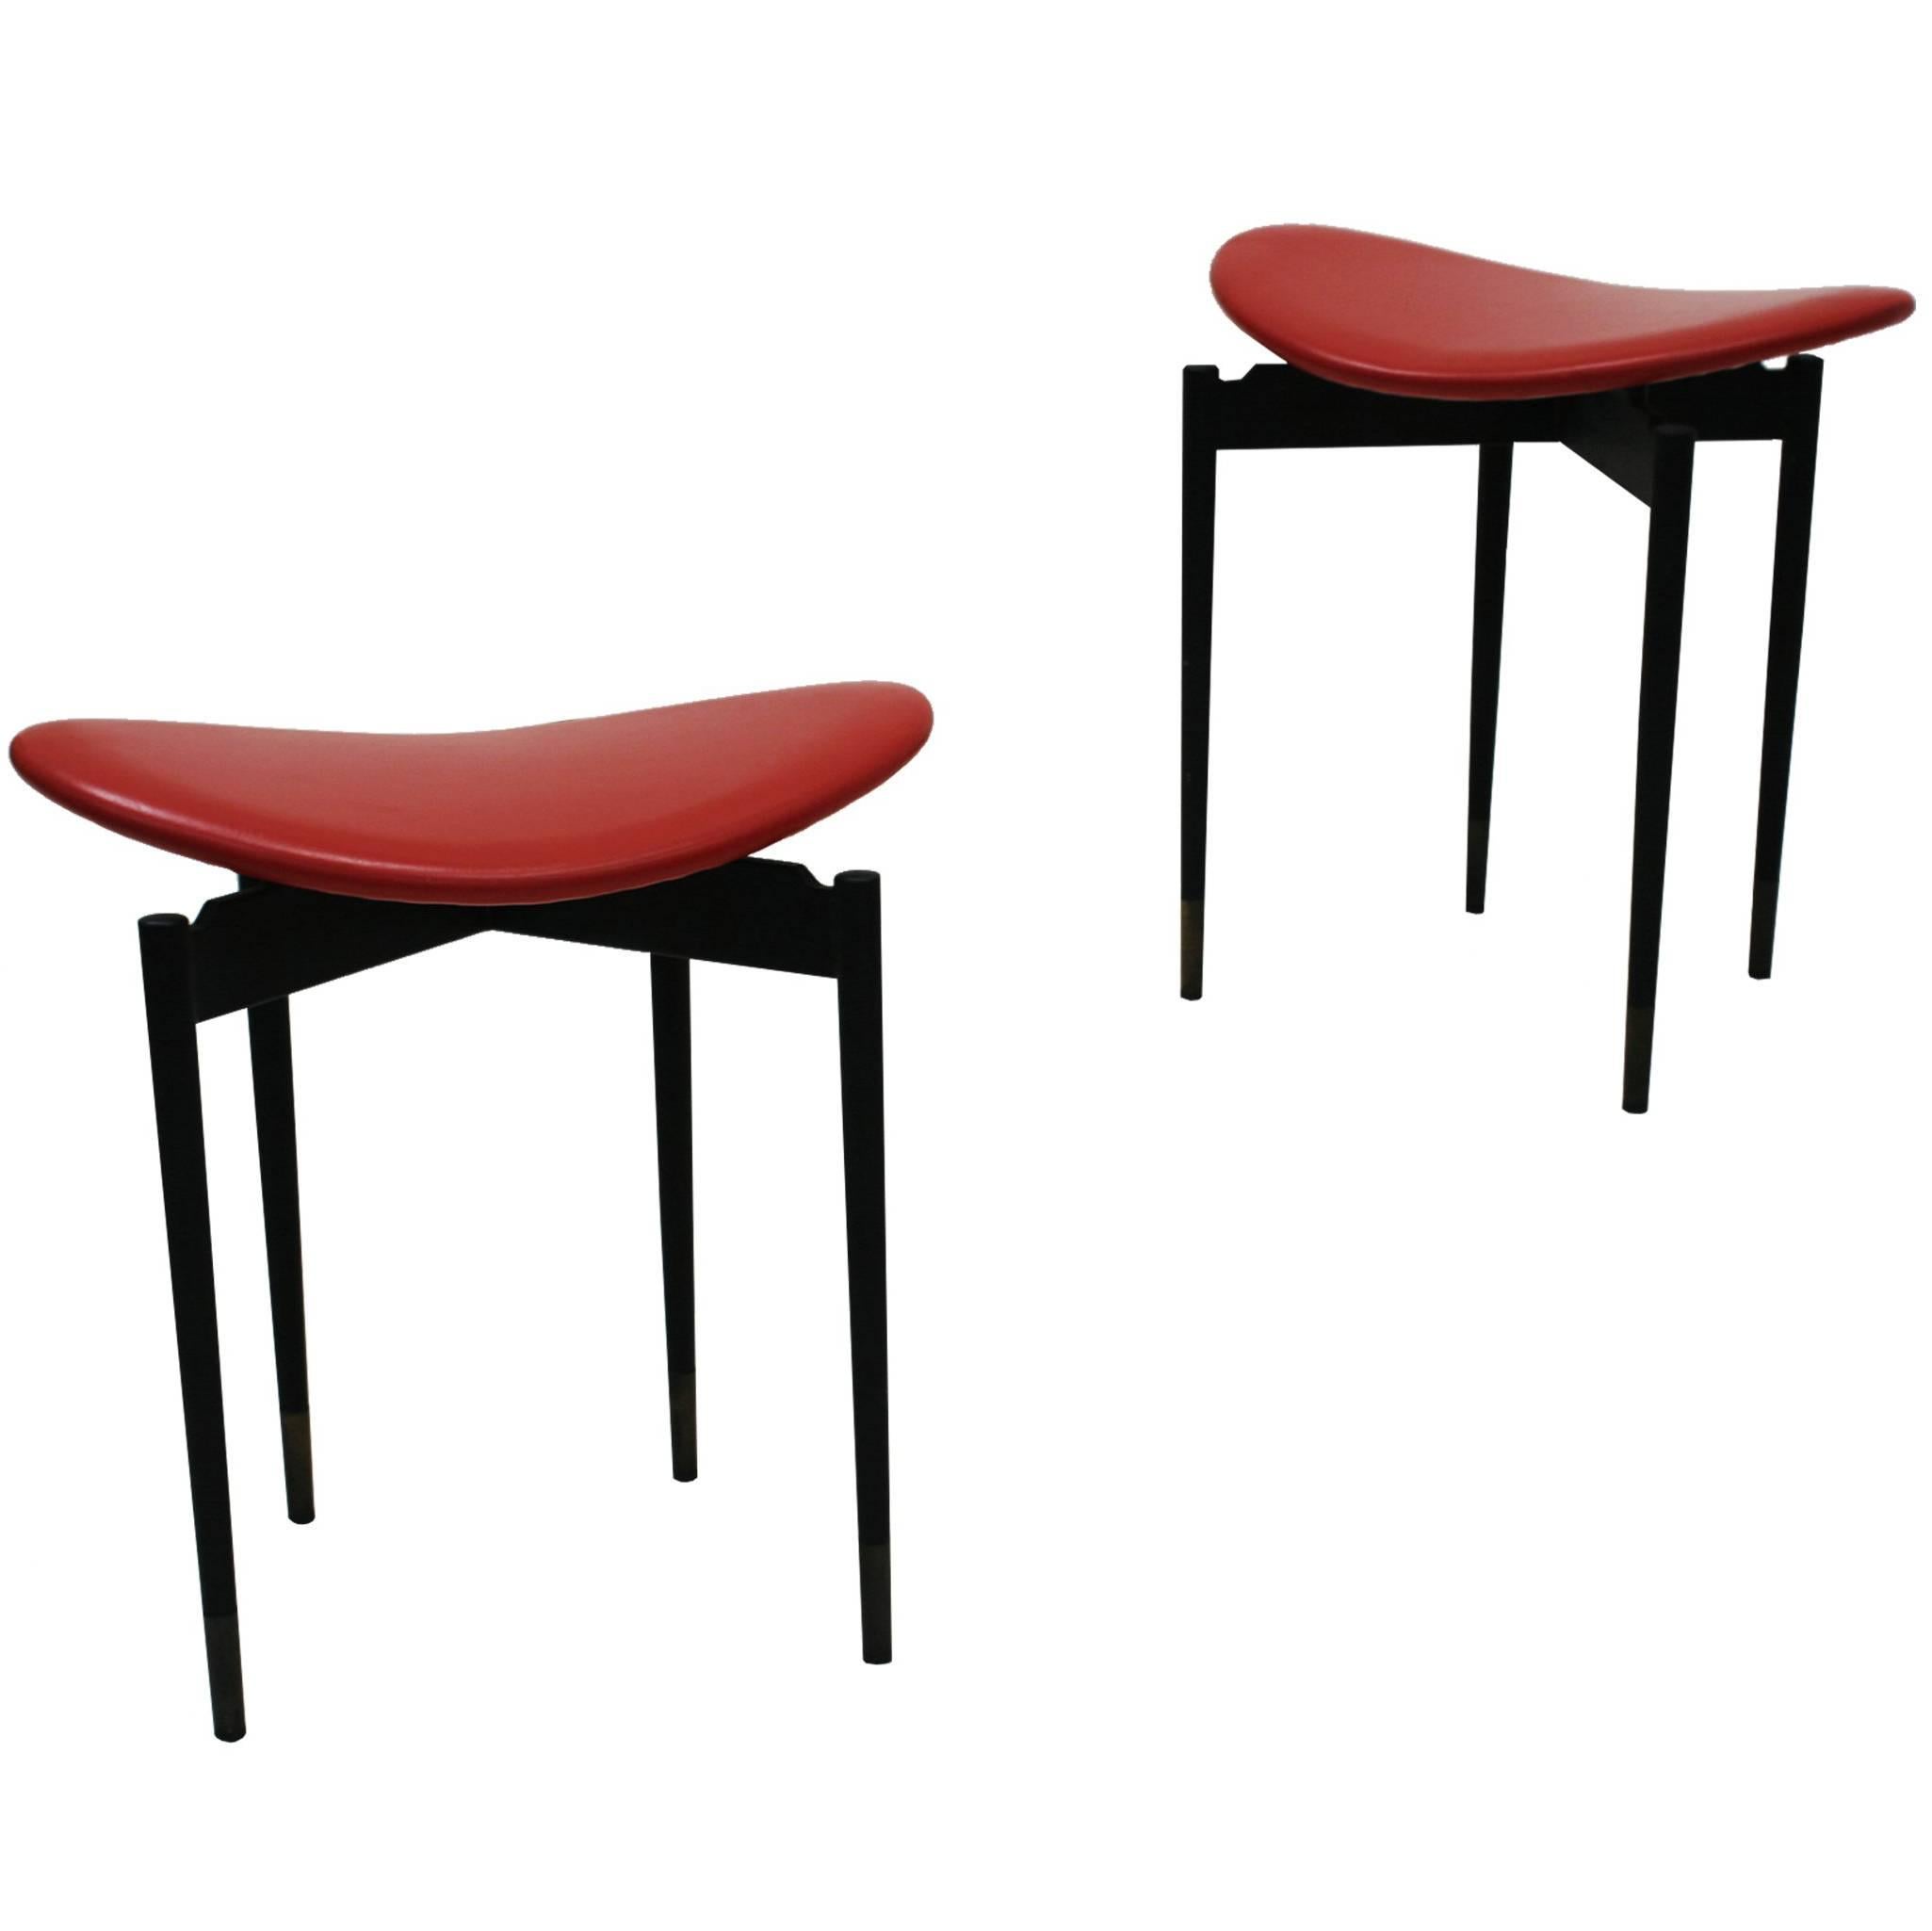 Set of Two "Lutrario" Stools Designed by Carlo Mollino, Italy, 1959